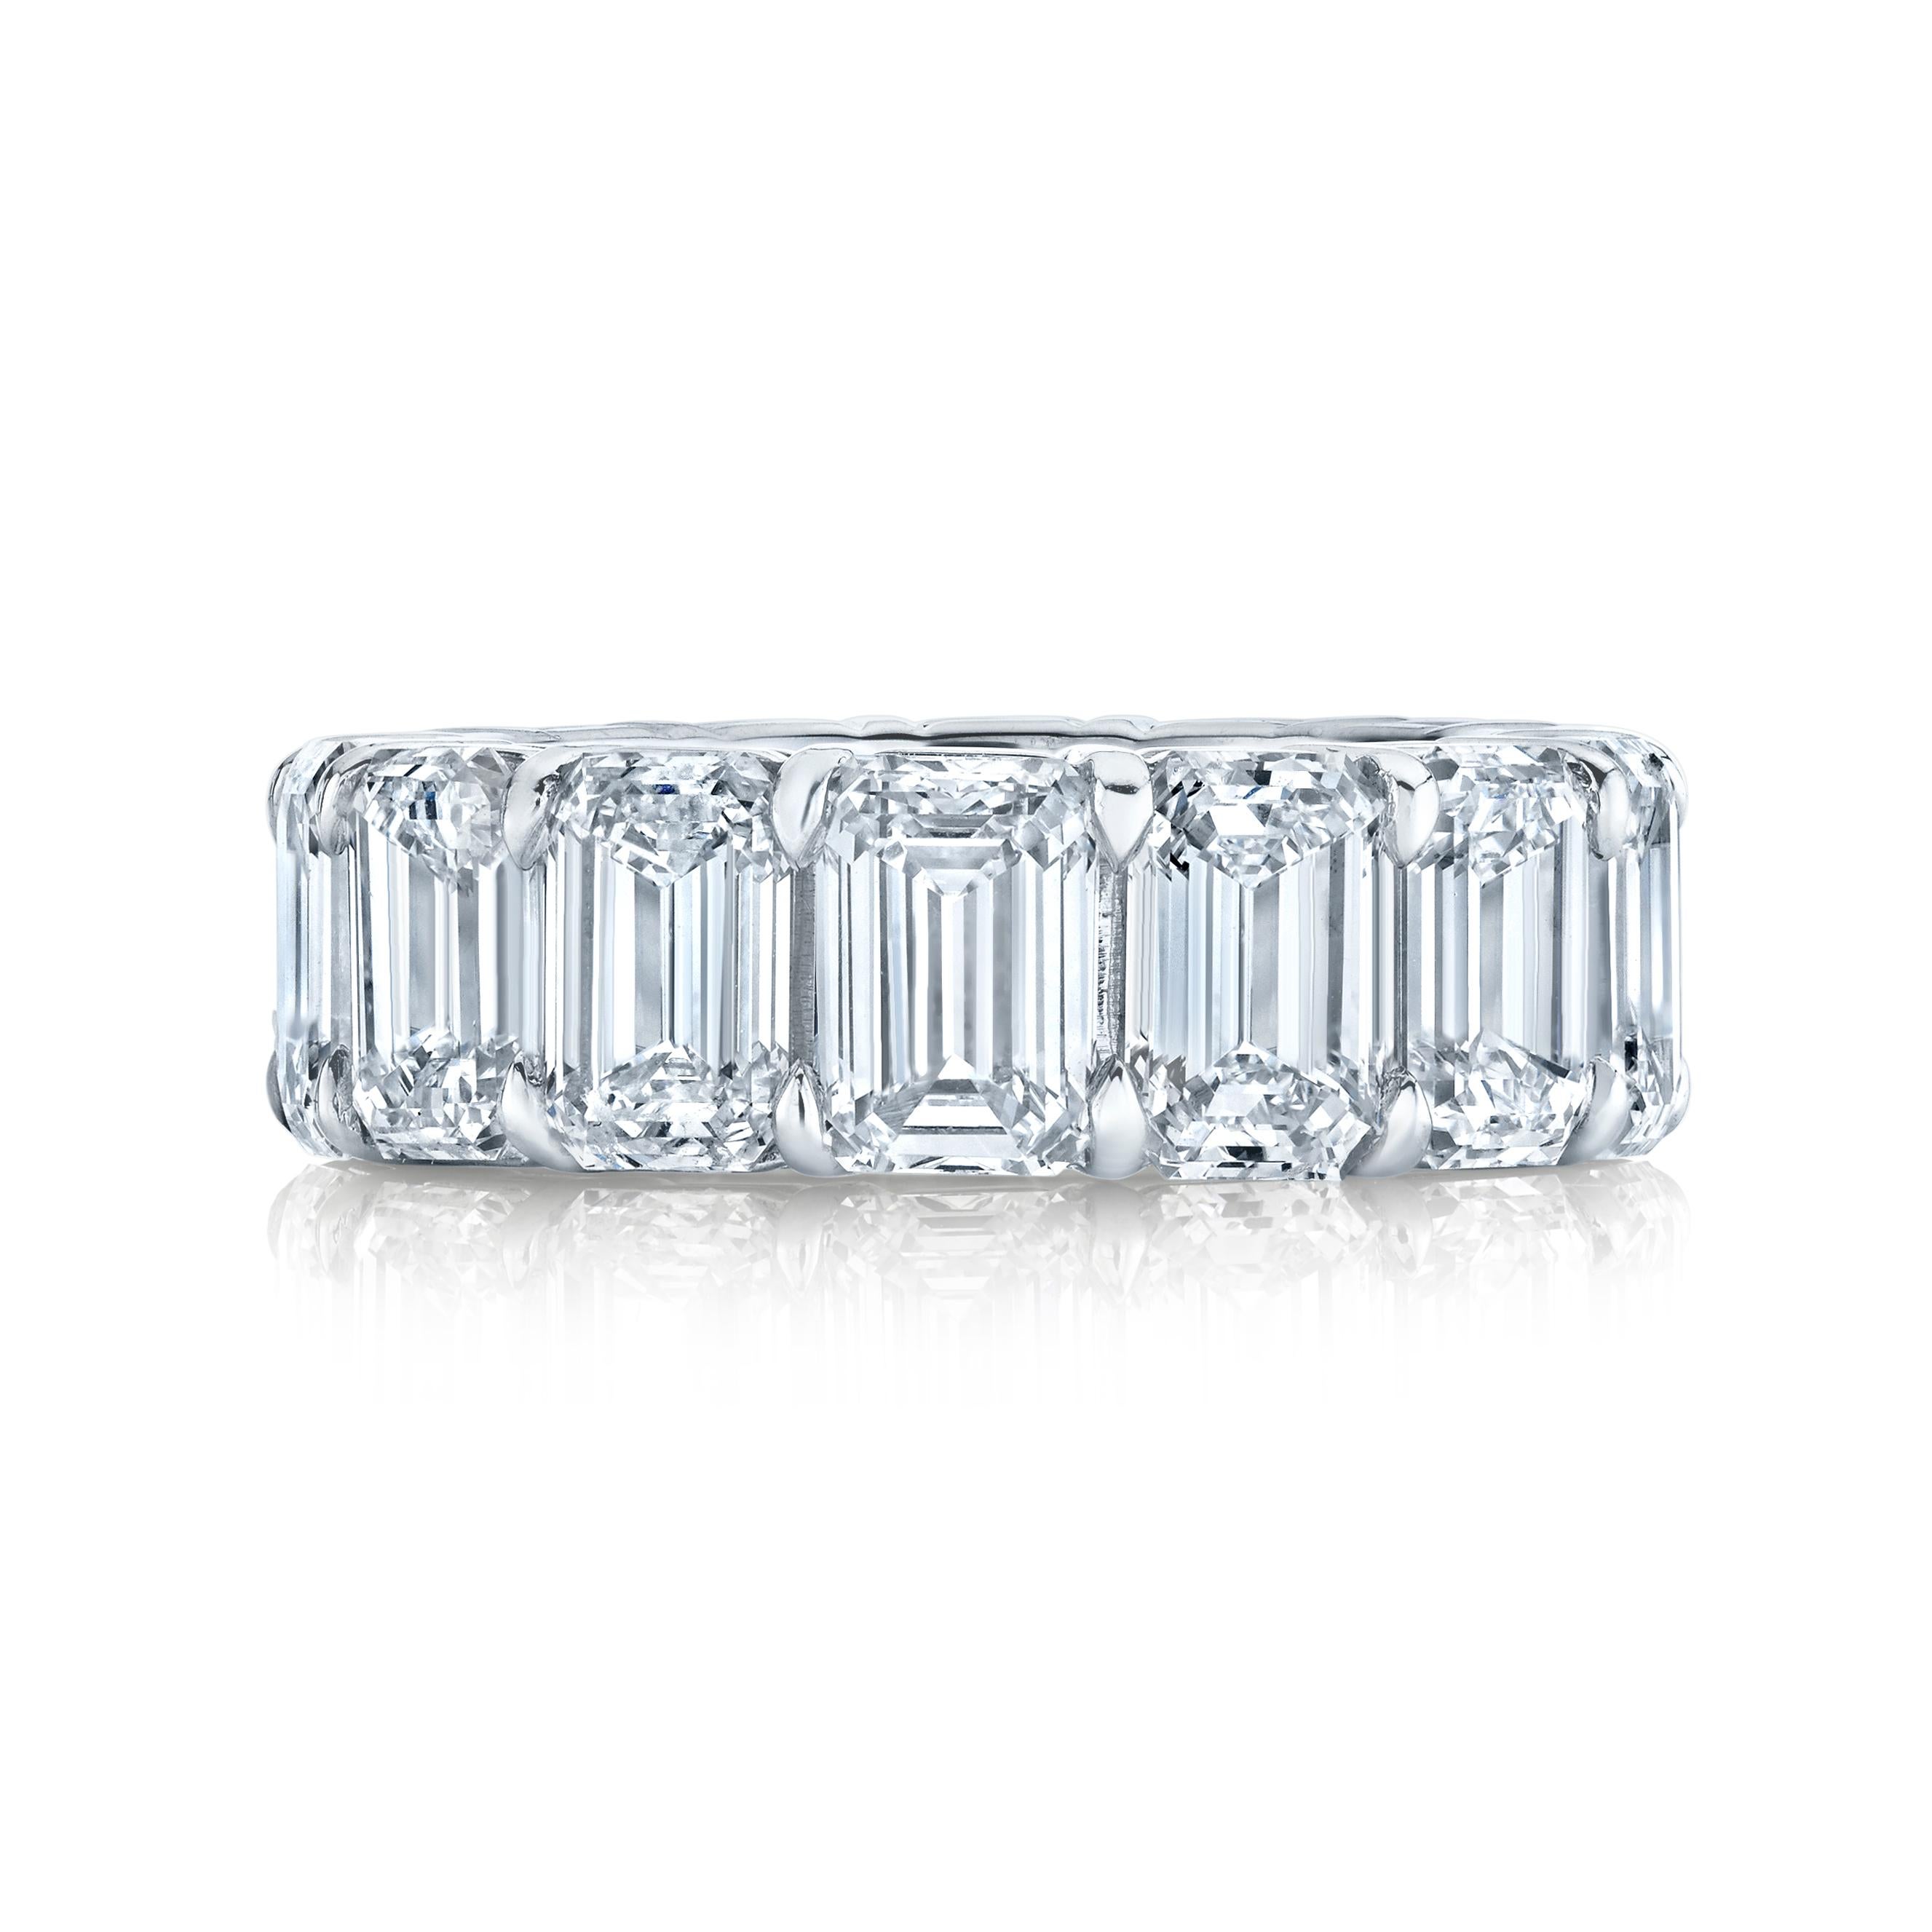 15 Emerald Cut Diamonds set in a platinum mounting.
13.69 carats total weight
Approximate weight per stone is from 0.90 - 0.96 carats.
Color G - I  Clarity IF - VS2
All stones are certified by GIA.
Ring size 6.75

